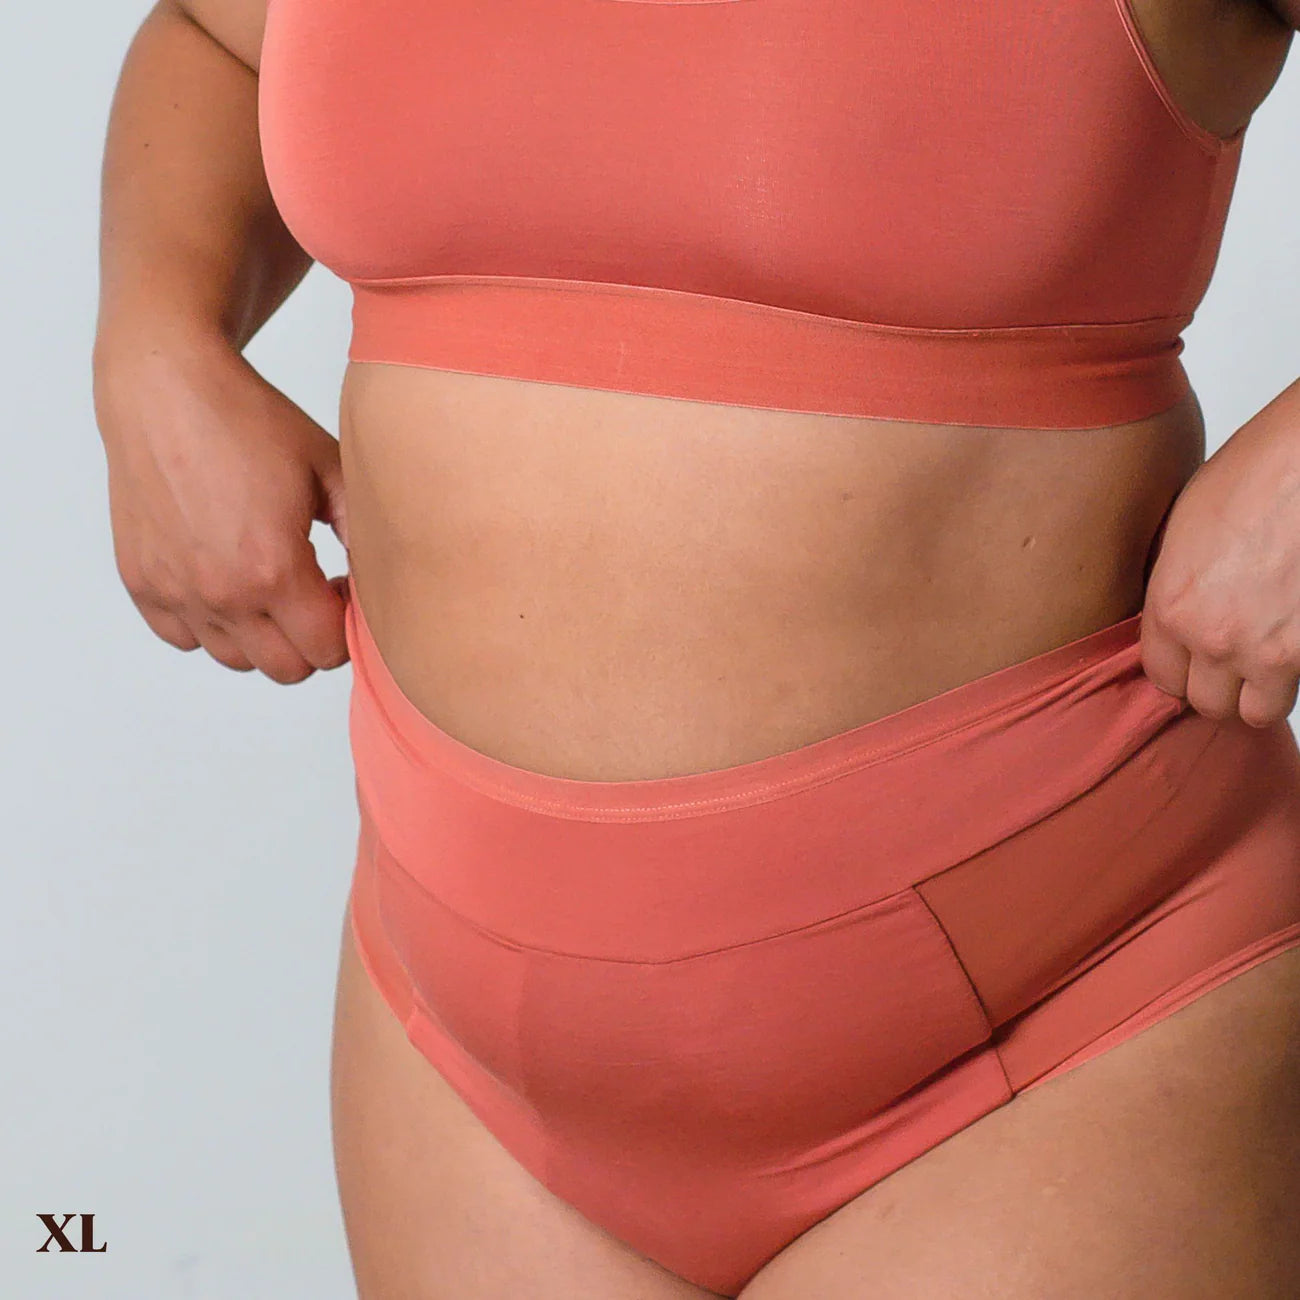 Freya High Waist with Mesh - Super Leakproof Protection